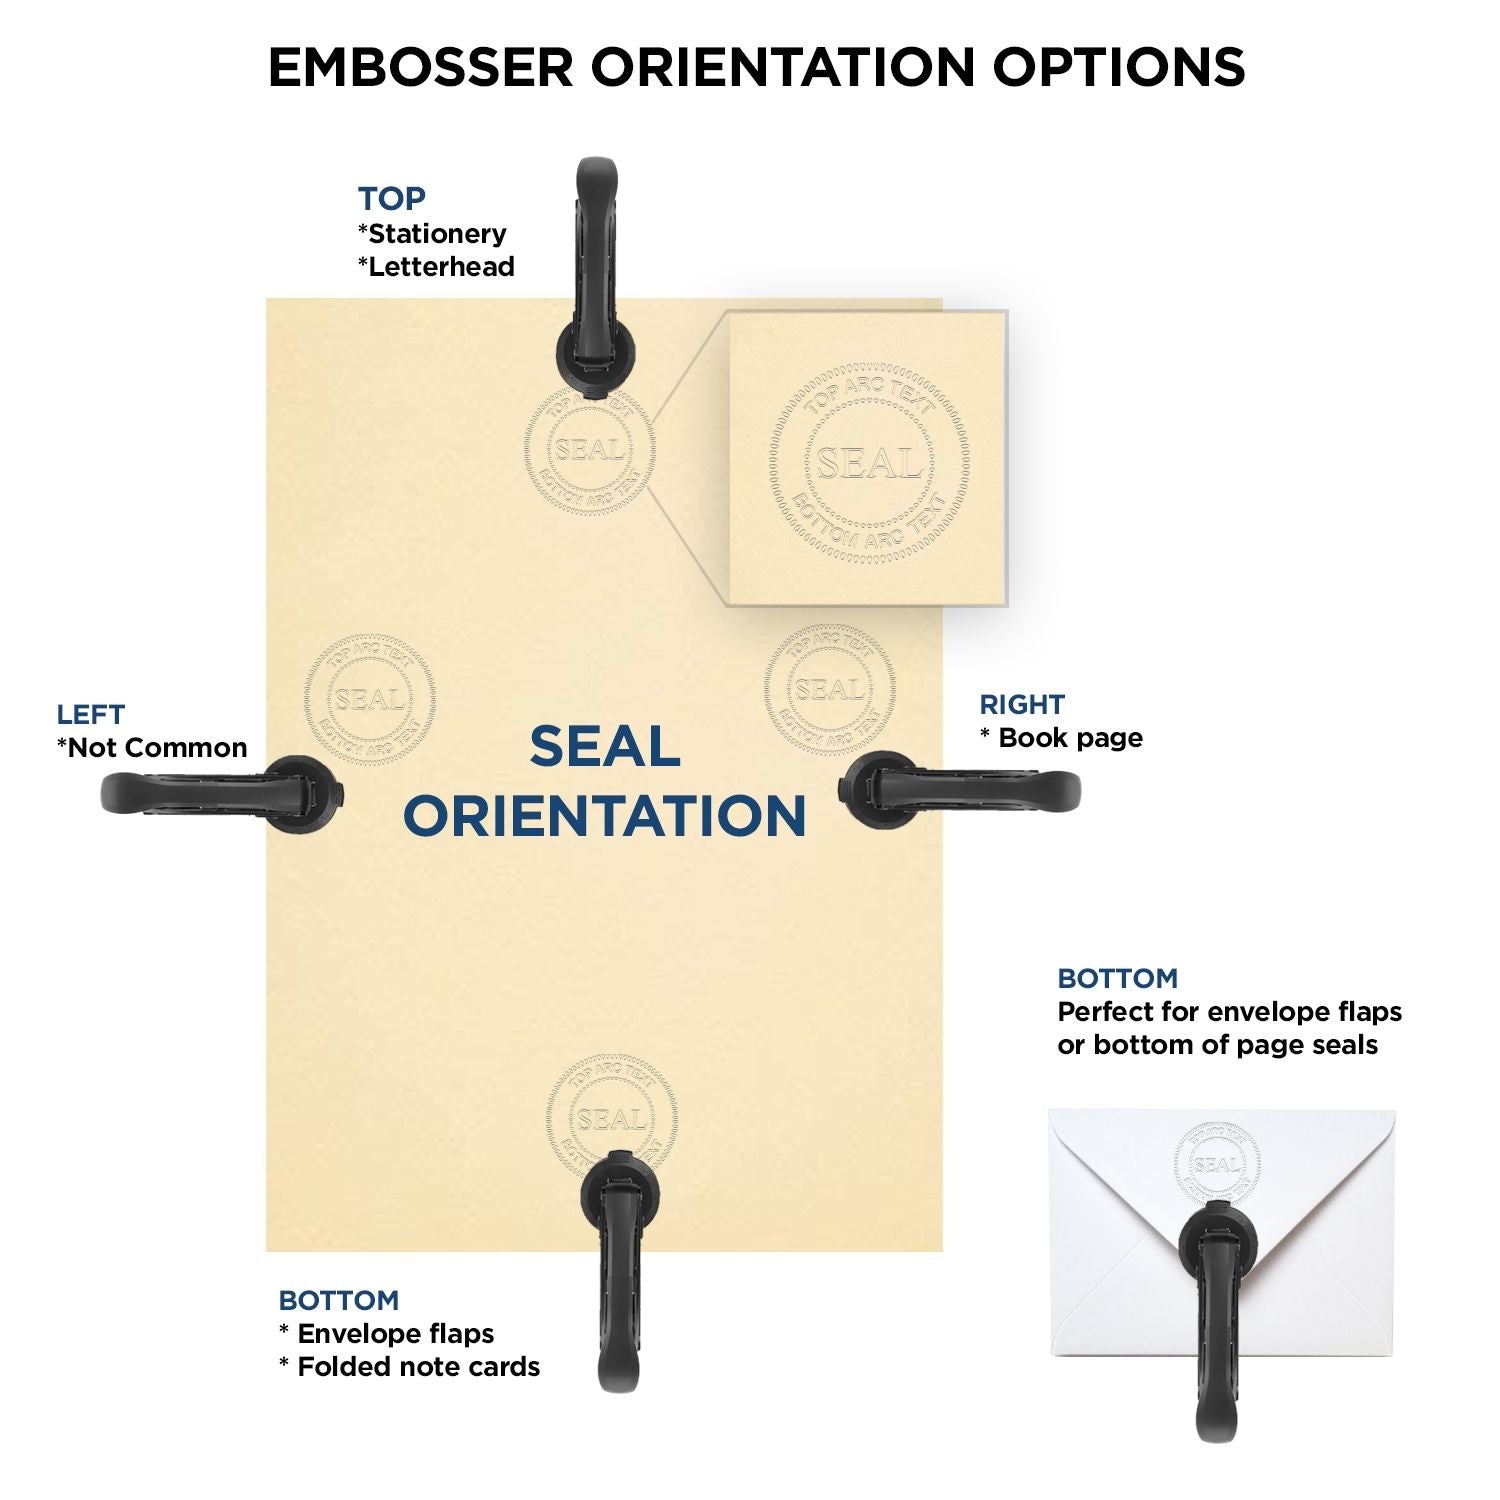 An infographic for the Heavy Duty Cast Iron Tennessee Land Surveyor Seal Embosser showing embosser orientation, this is showing examples of a top, bottom, right and left insert.